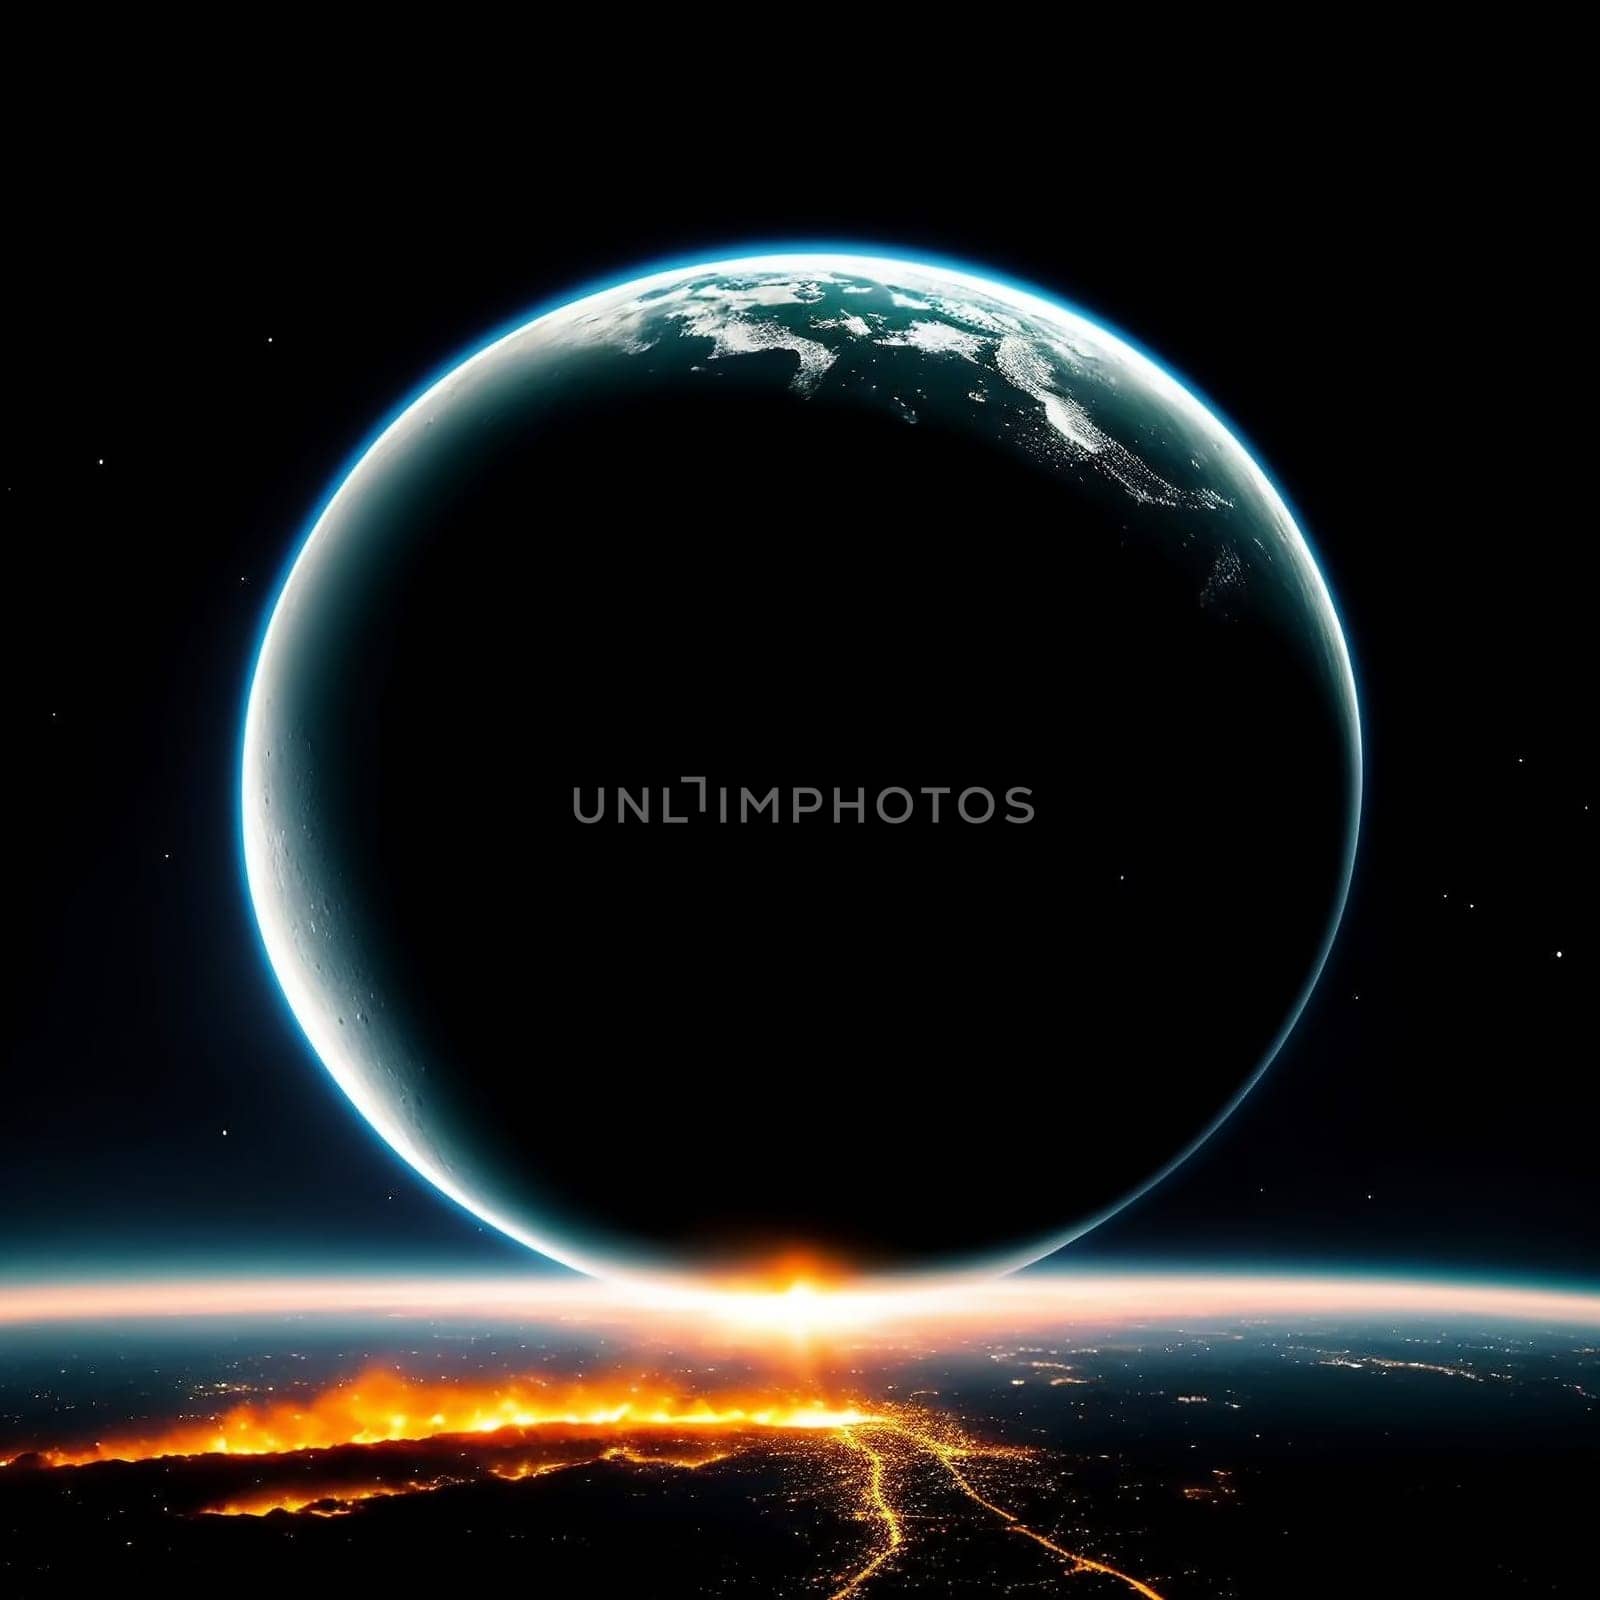 Planet Earth on fire and a new untouched planet against the background of the night sky. AI generated image.